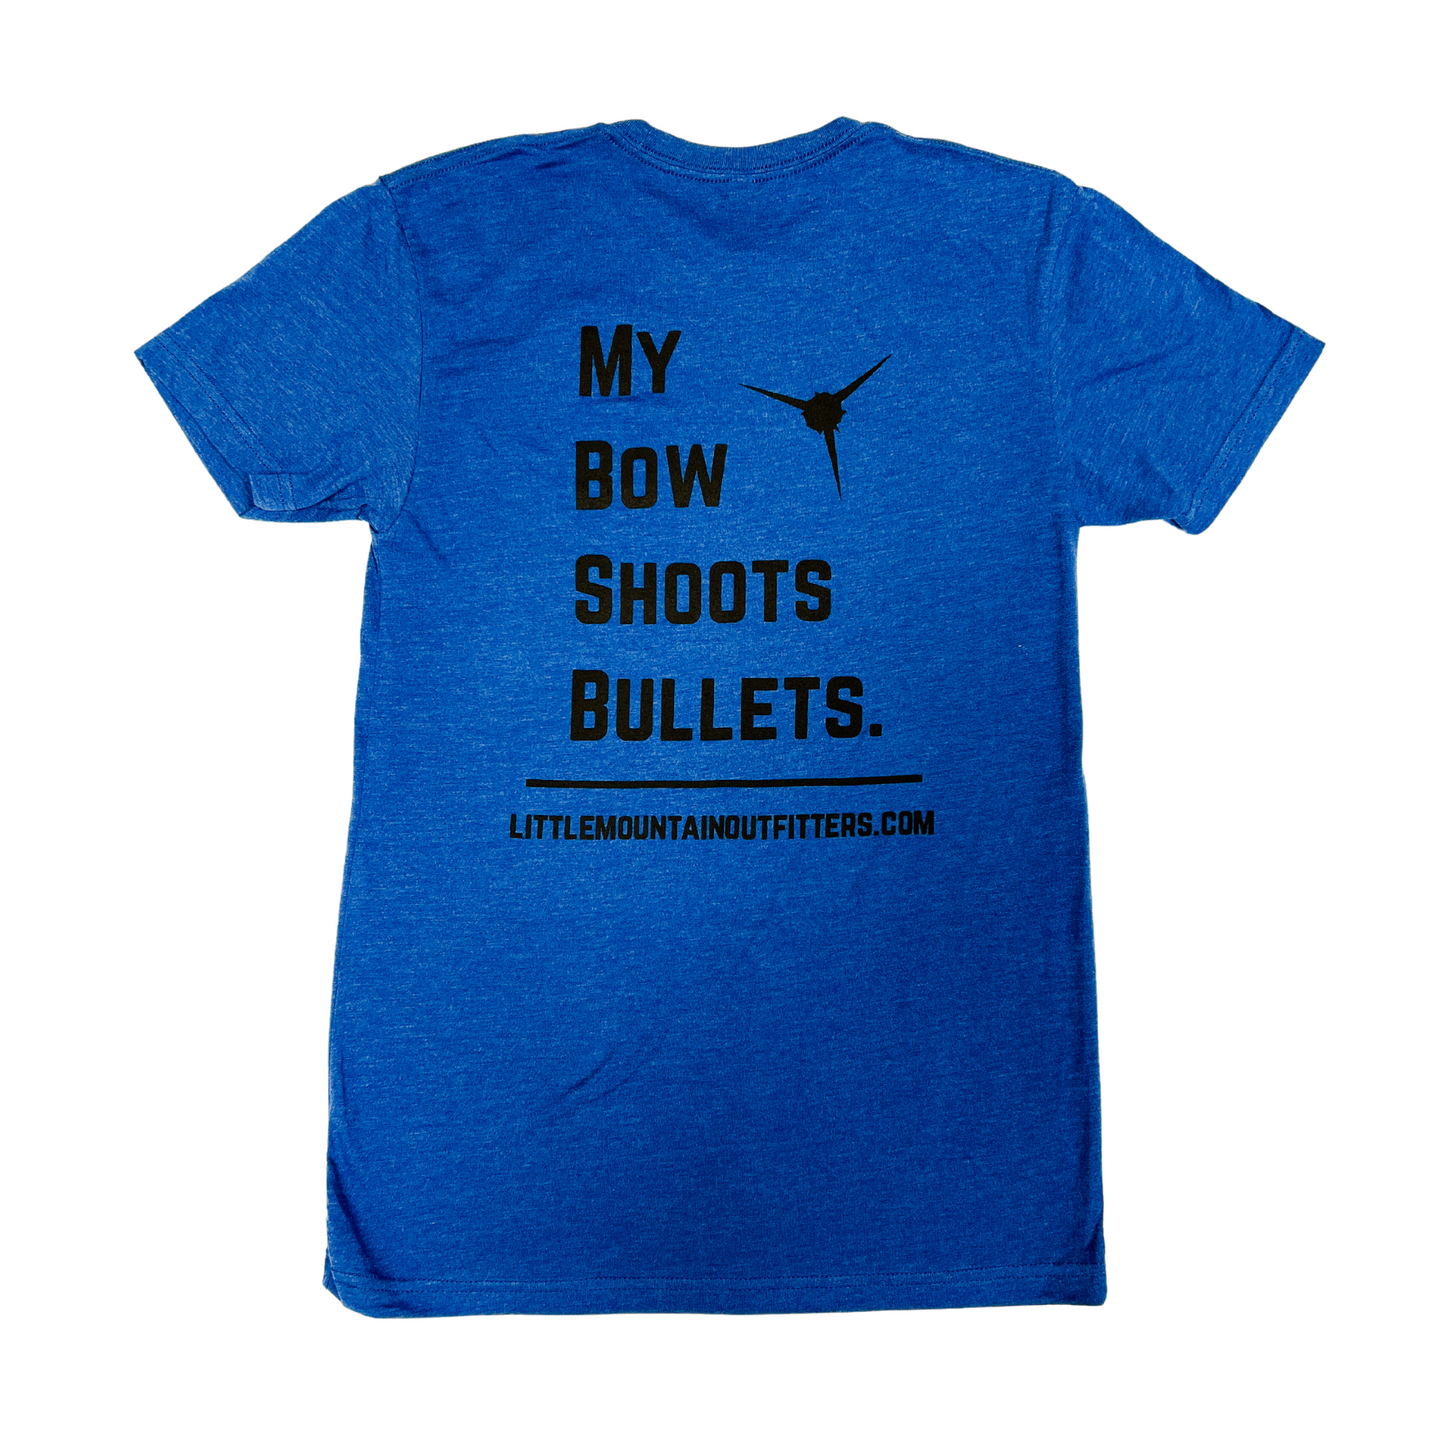 My Bow Shoots Bullets - Little Mountain Outfitters T Shirt